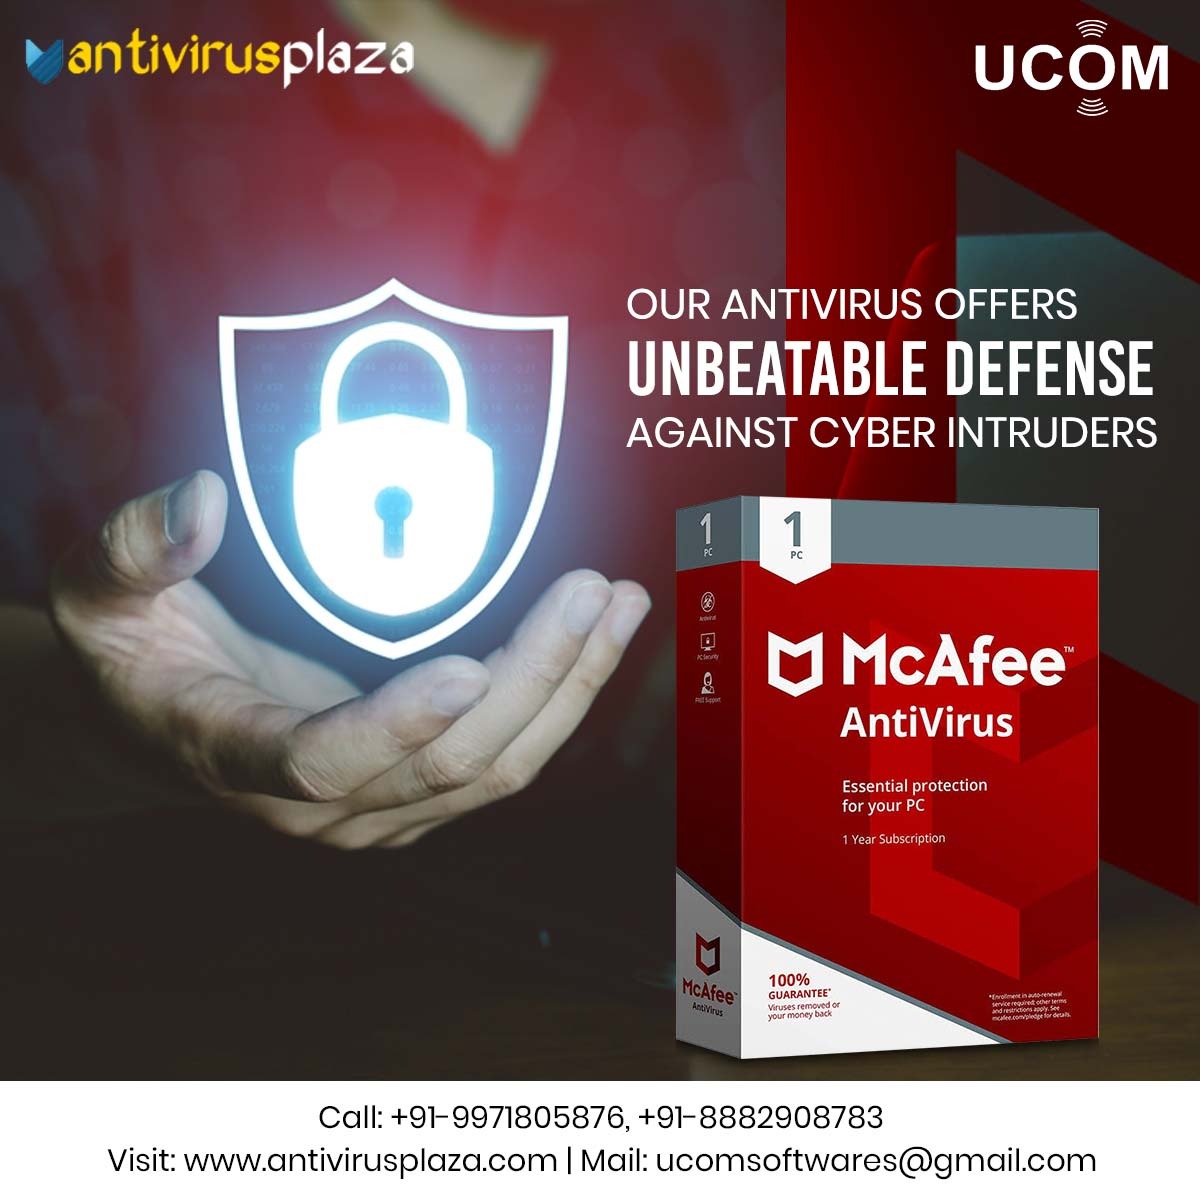 Lock down your devices and say no to cyber threats! Our antivirus provides unparalleled defense, ensuring your peace of mind in the digital realm.

𝐂𝐚𝐥𝐥: +91-99718 05876
𝐕𝐢𝐬𝐢𝐭 𝐔𝐬: antivirusplaza.com

#UnmatchedProtection #StaySafeOnline #AntivirusPlaza